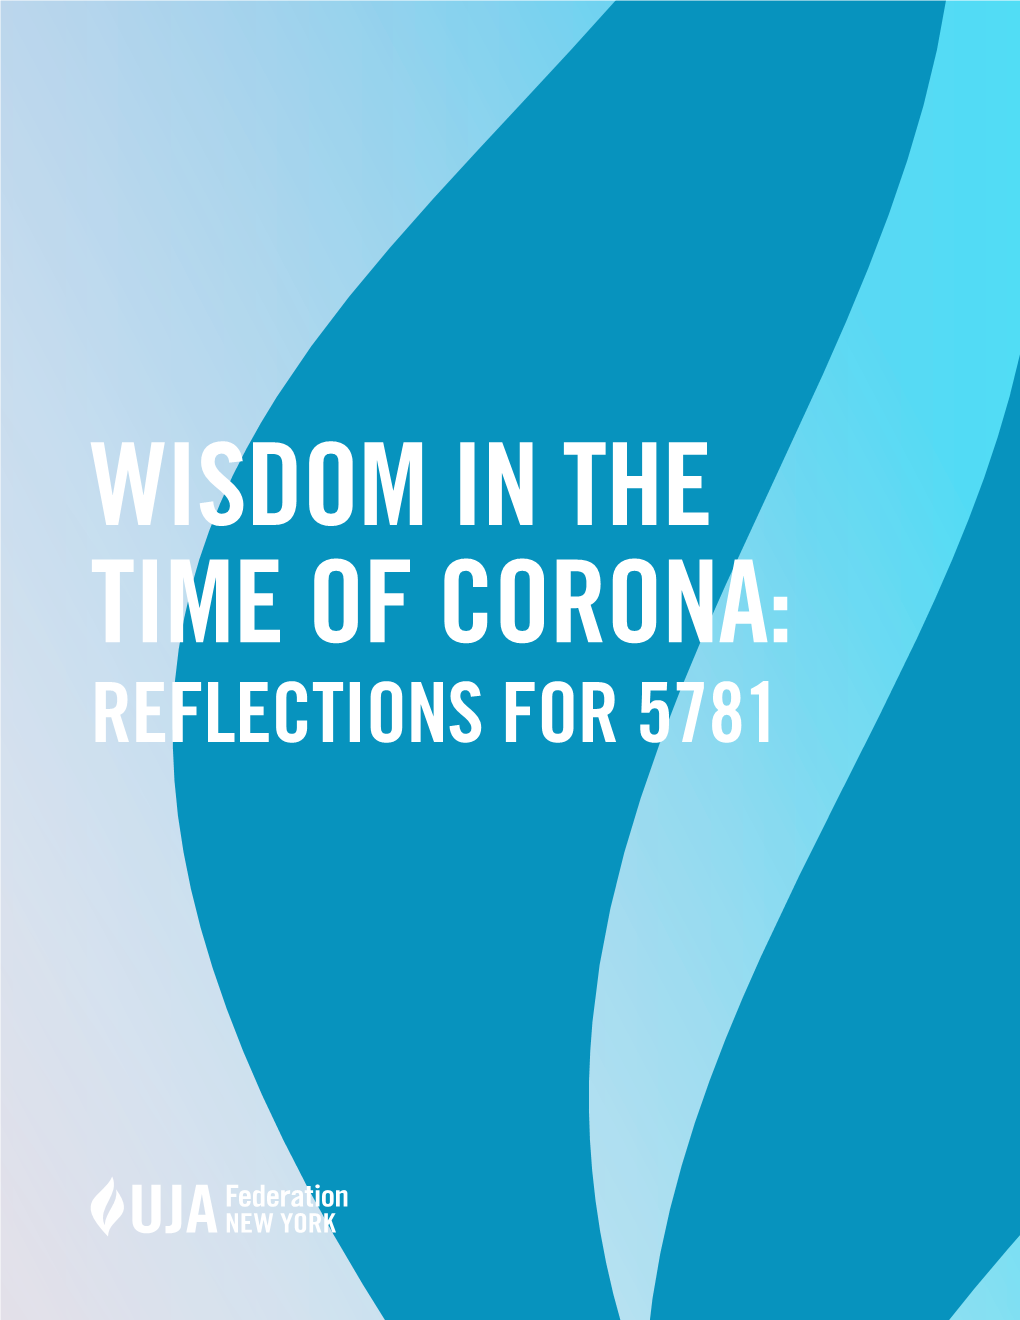 Wisdom in the Time of Corona: Reflections for 5781